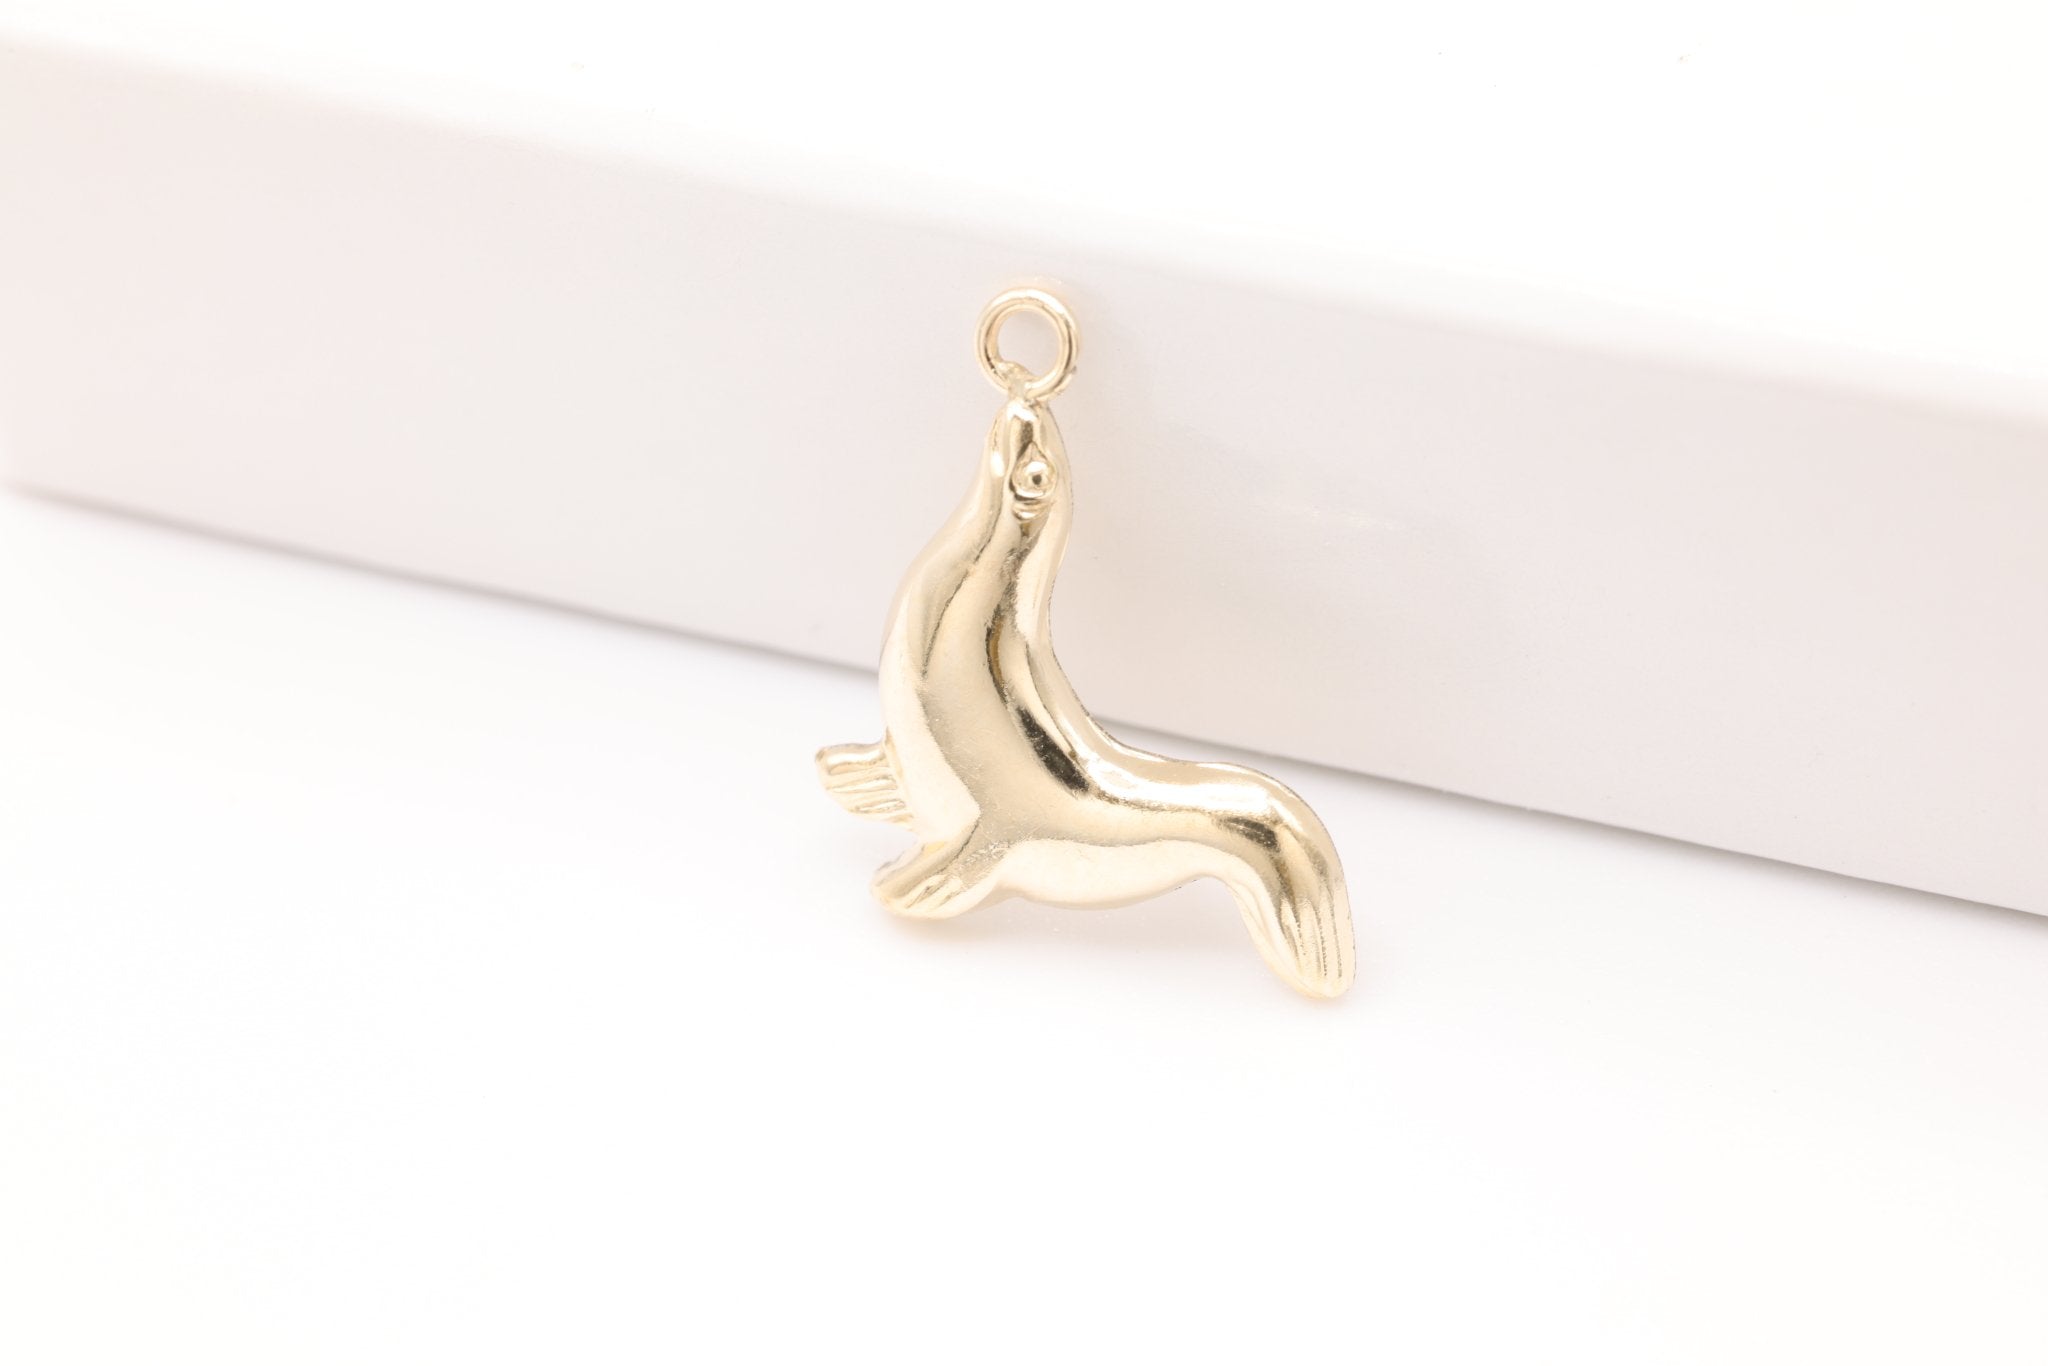 Seal Charm, 14K Gold - Filled, Stamped Seal Sealife Charm, Jewelry Making Charm - HarperCrown